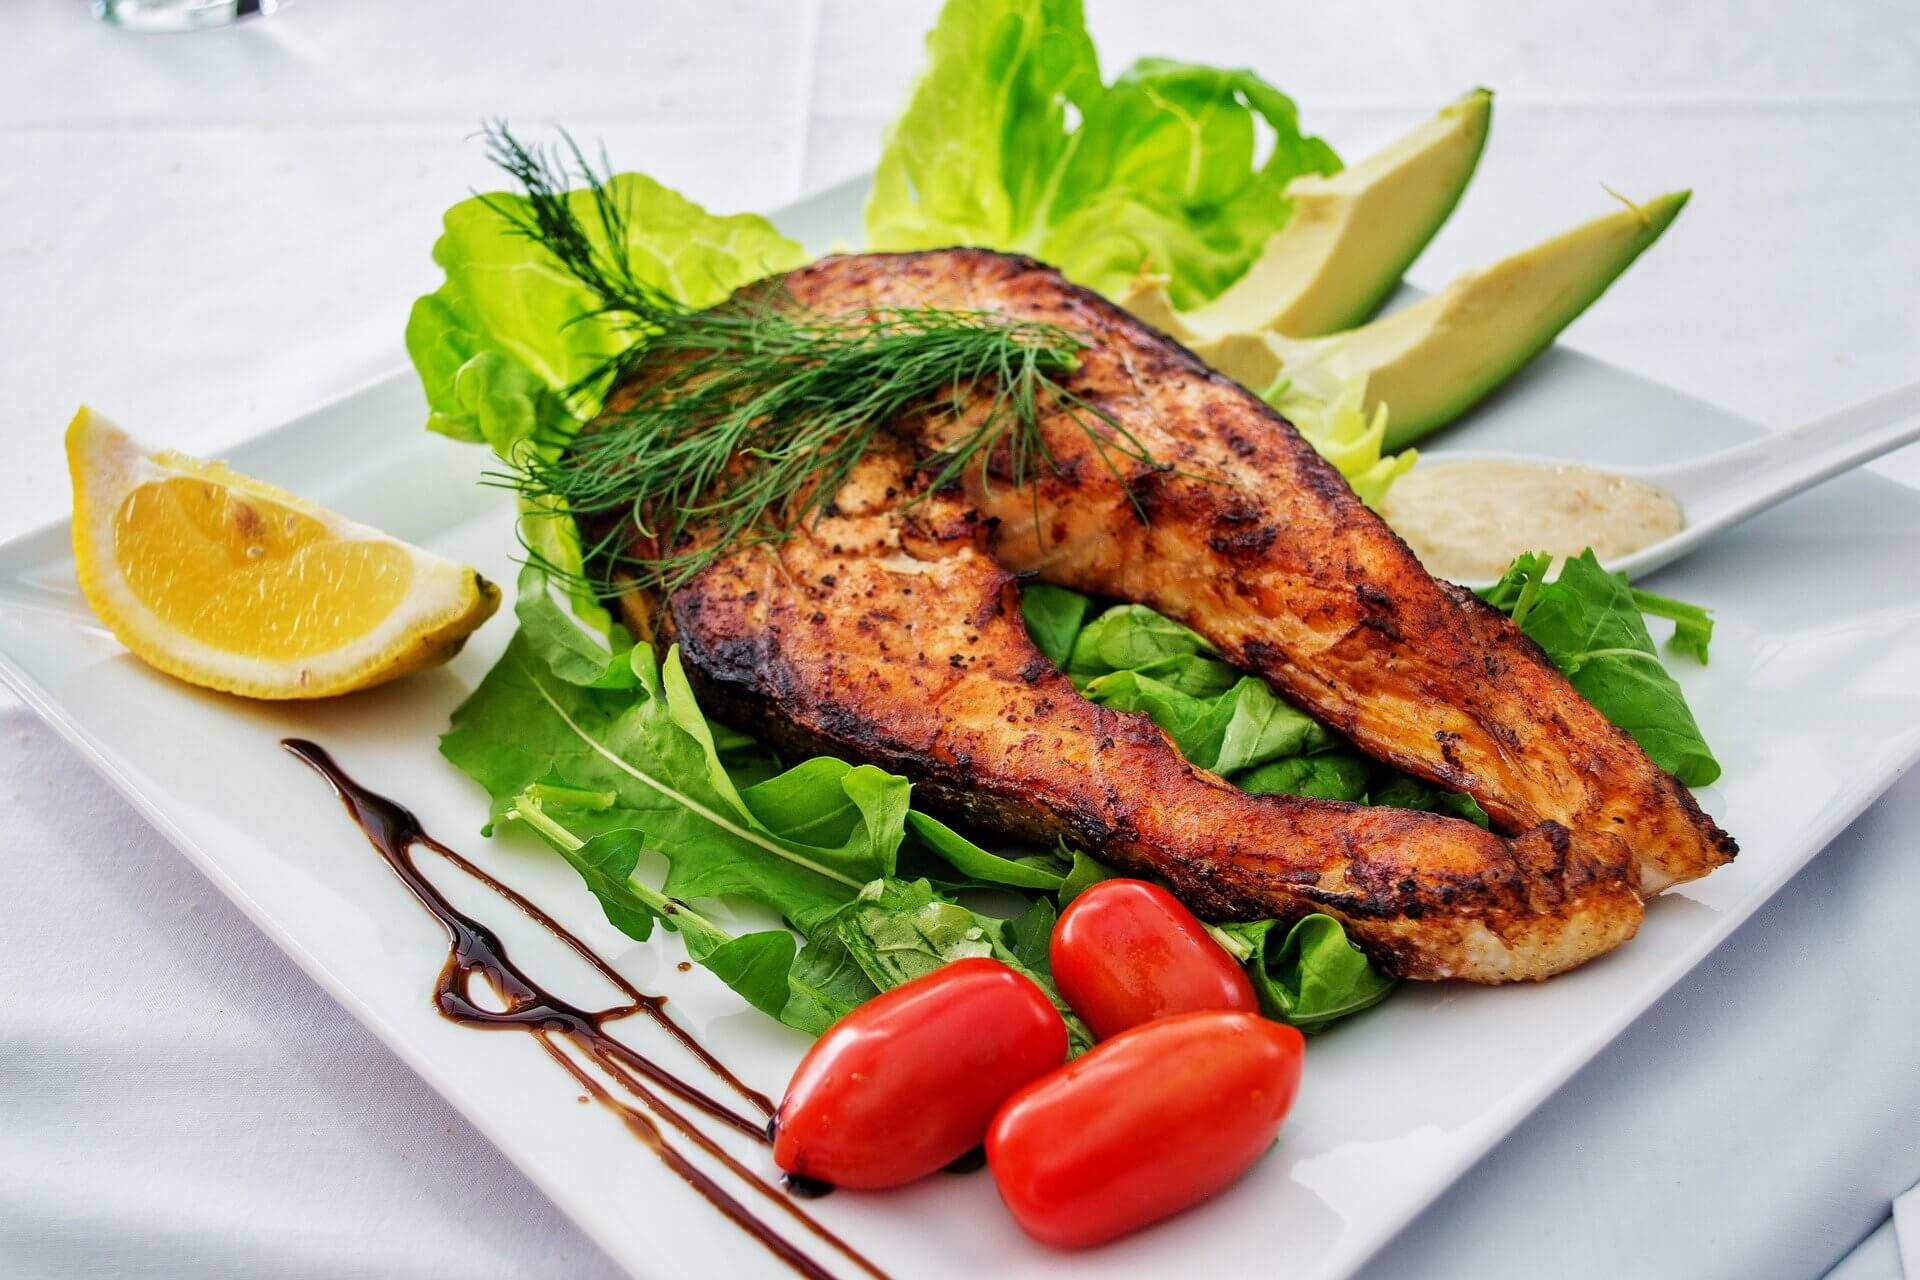 Salmon is a great source of Omega-3s fatty acids